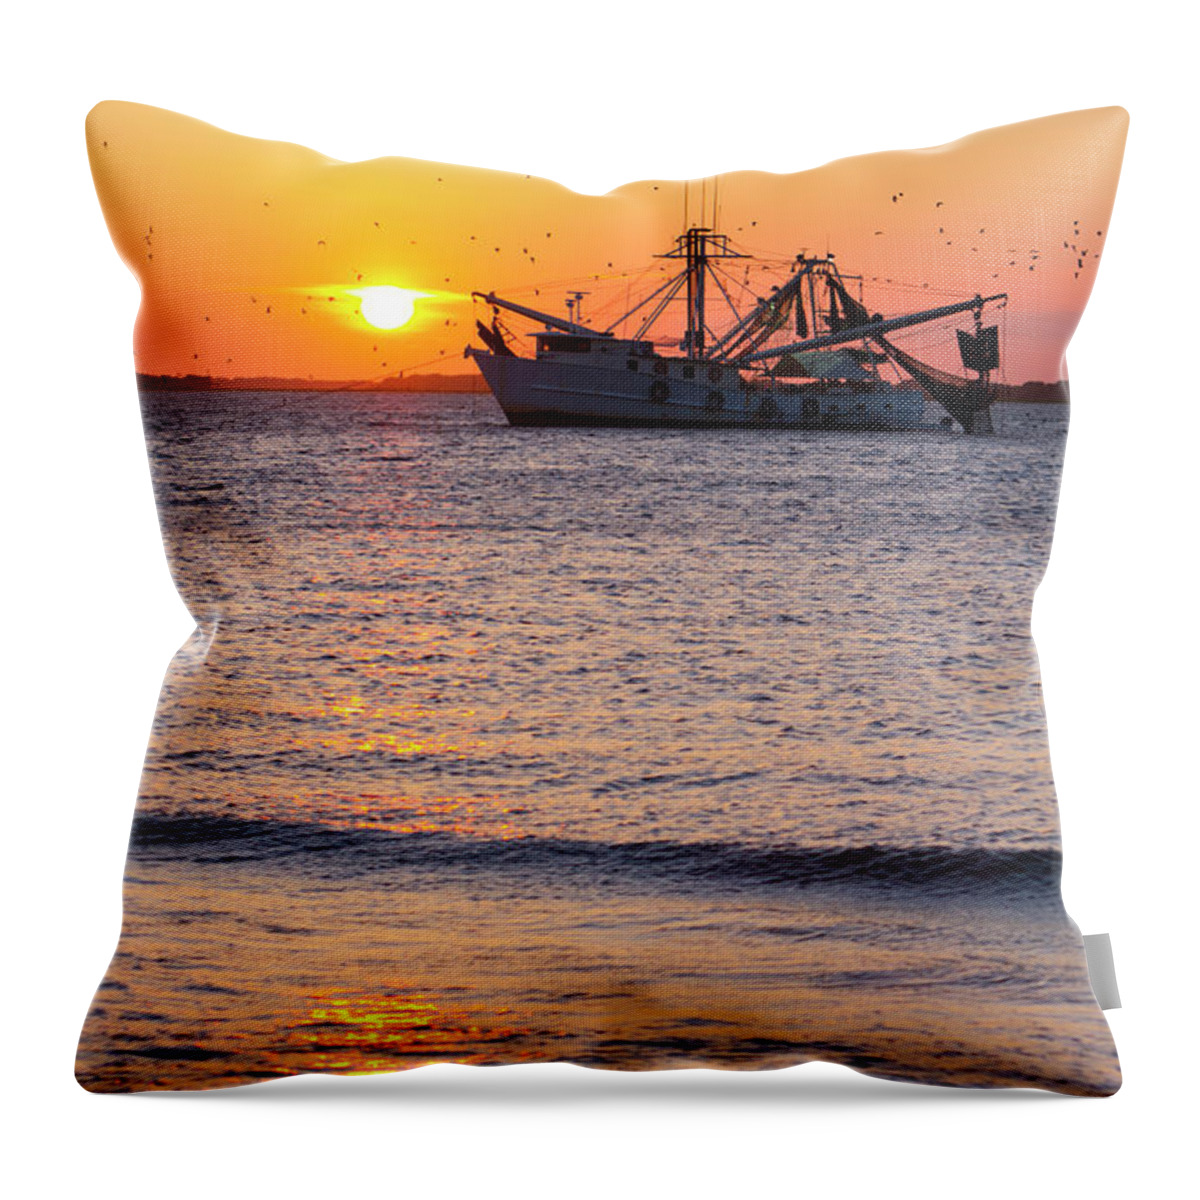 Water's Edge Throw Pillow featuring the photograph Fishing Boat At Sunset #1 by Tshortell